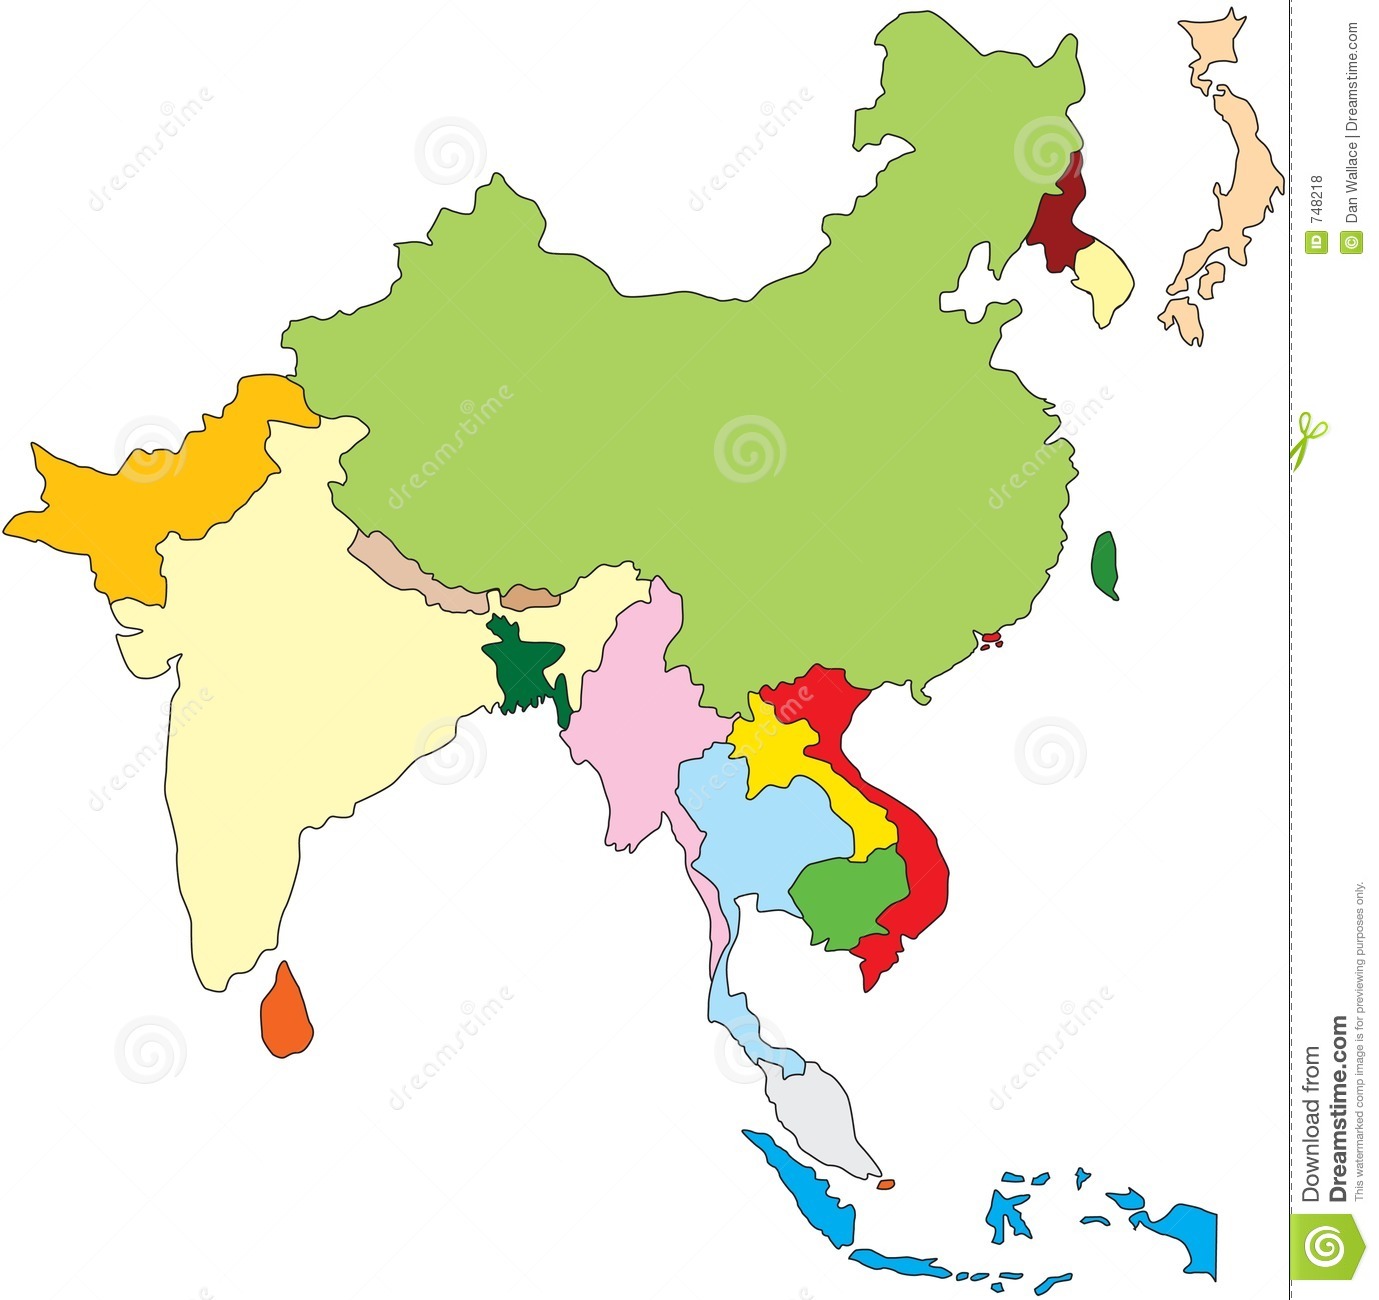 Map of South East Asia Countries